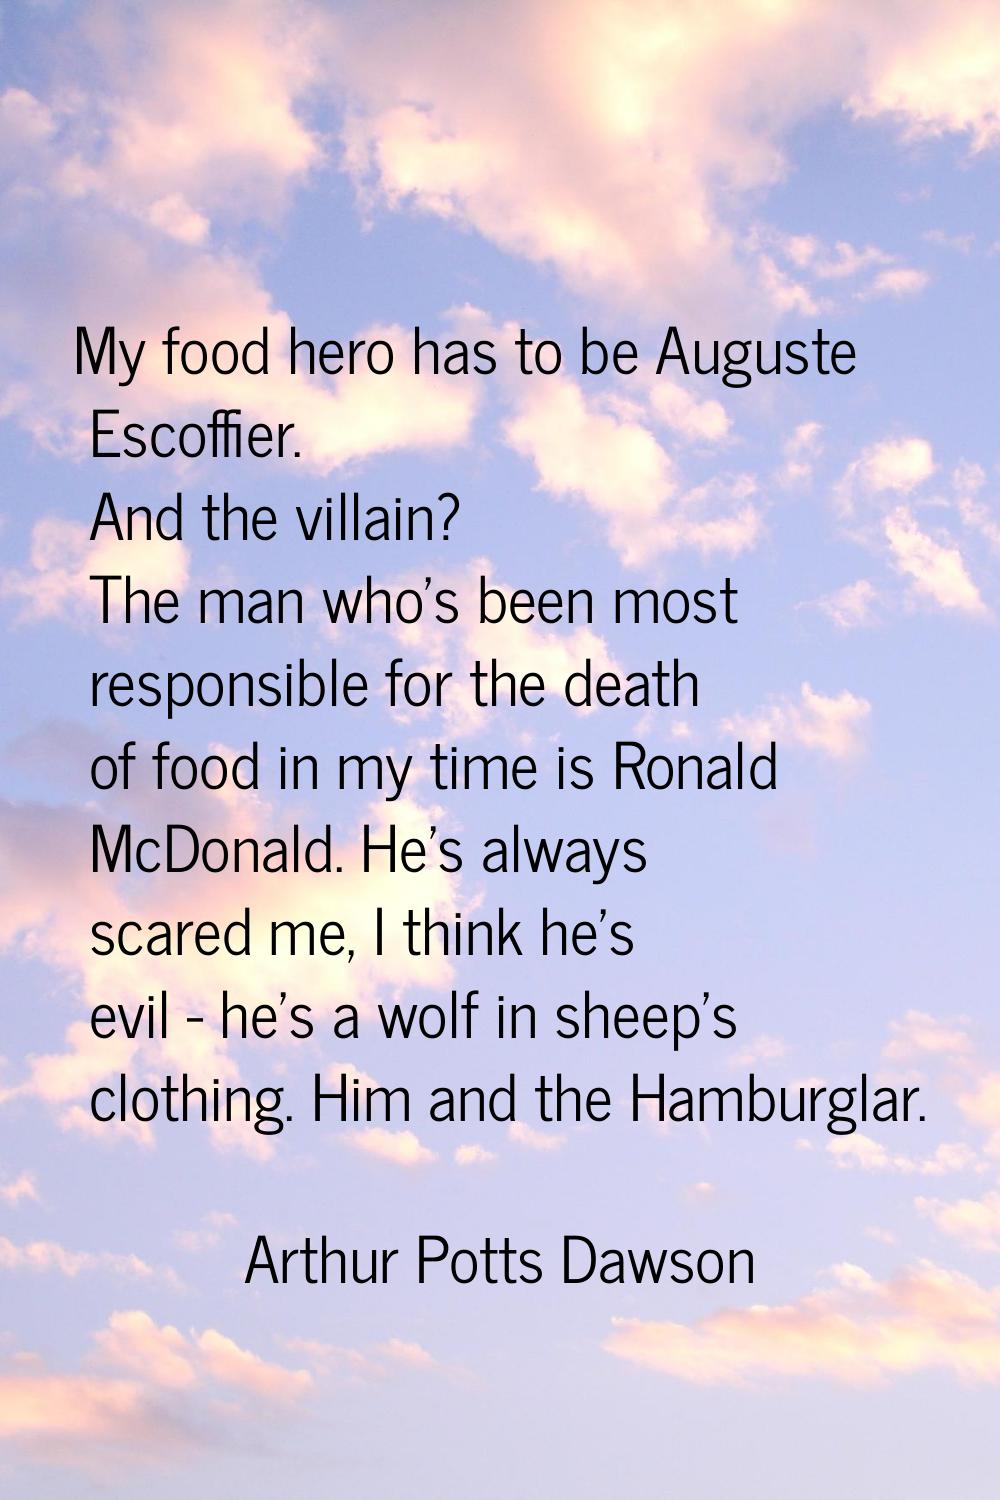 My food hero has to be Auguste Escoffier. And the villain? The man who's been most responsible for 